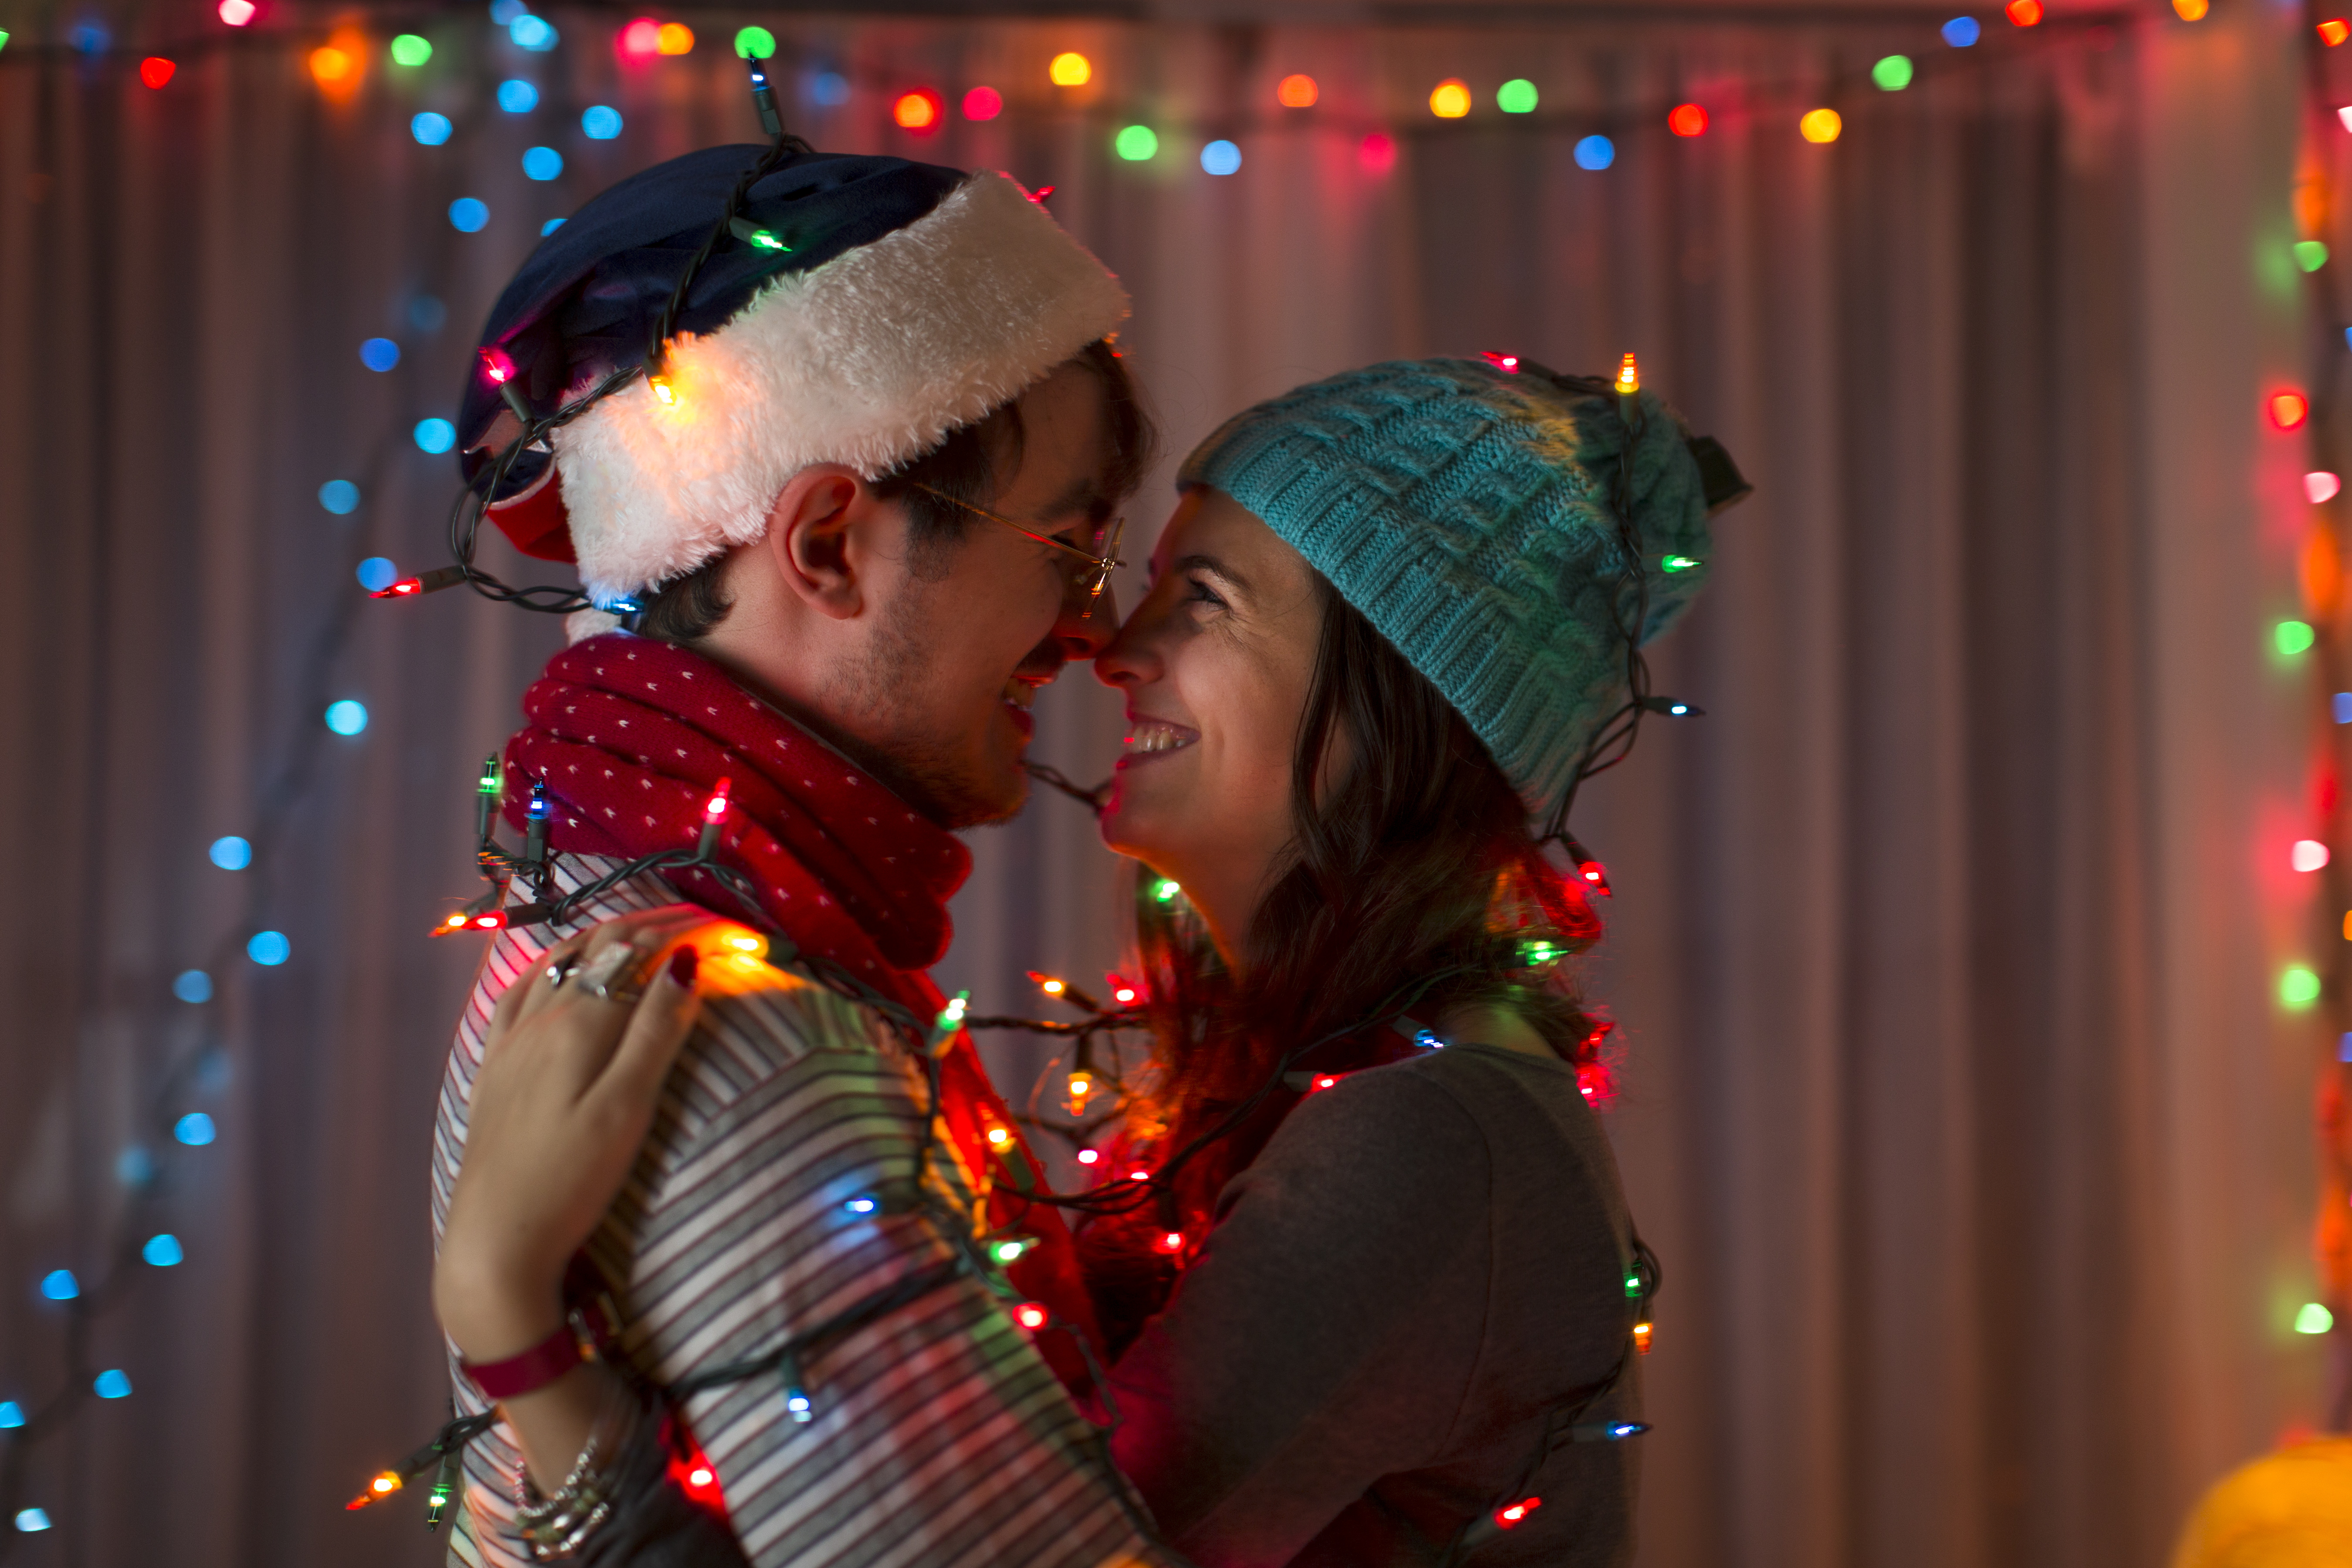 A loving couple wrapped in decorative lights on Christmas | Source: Getty Images